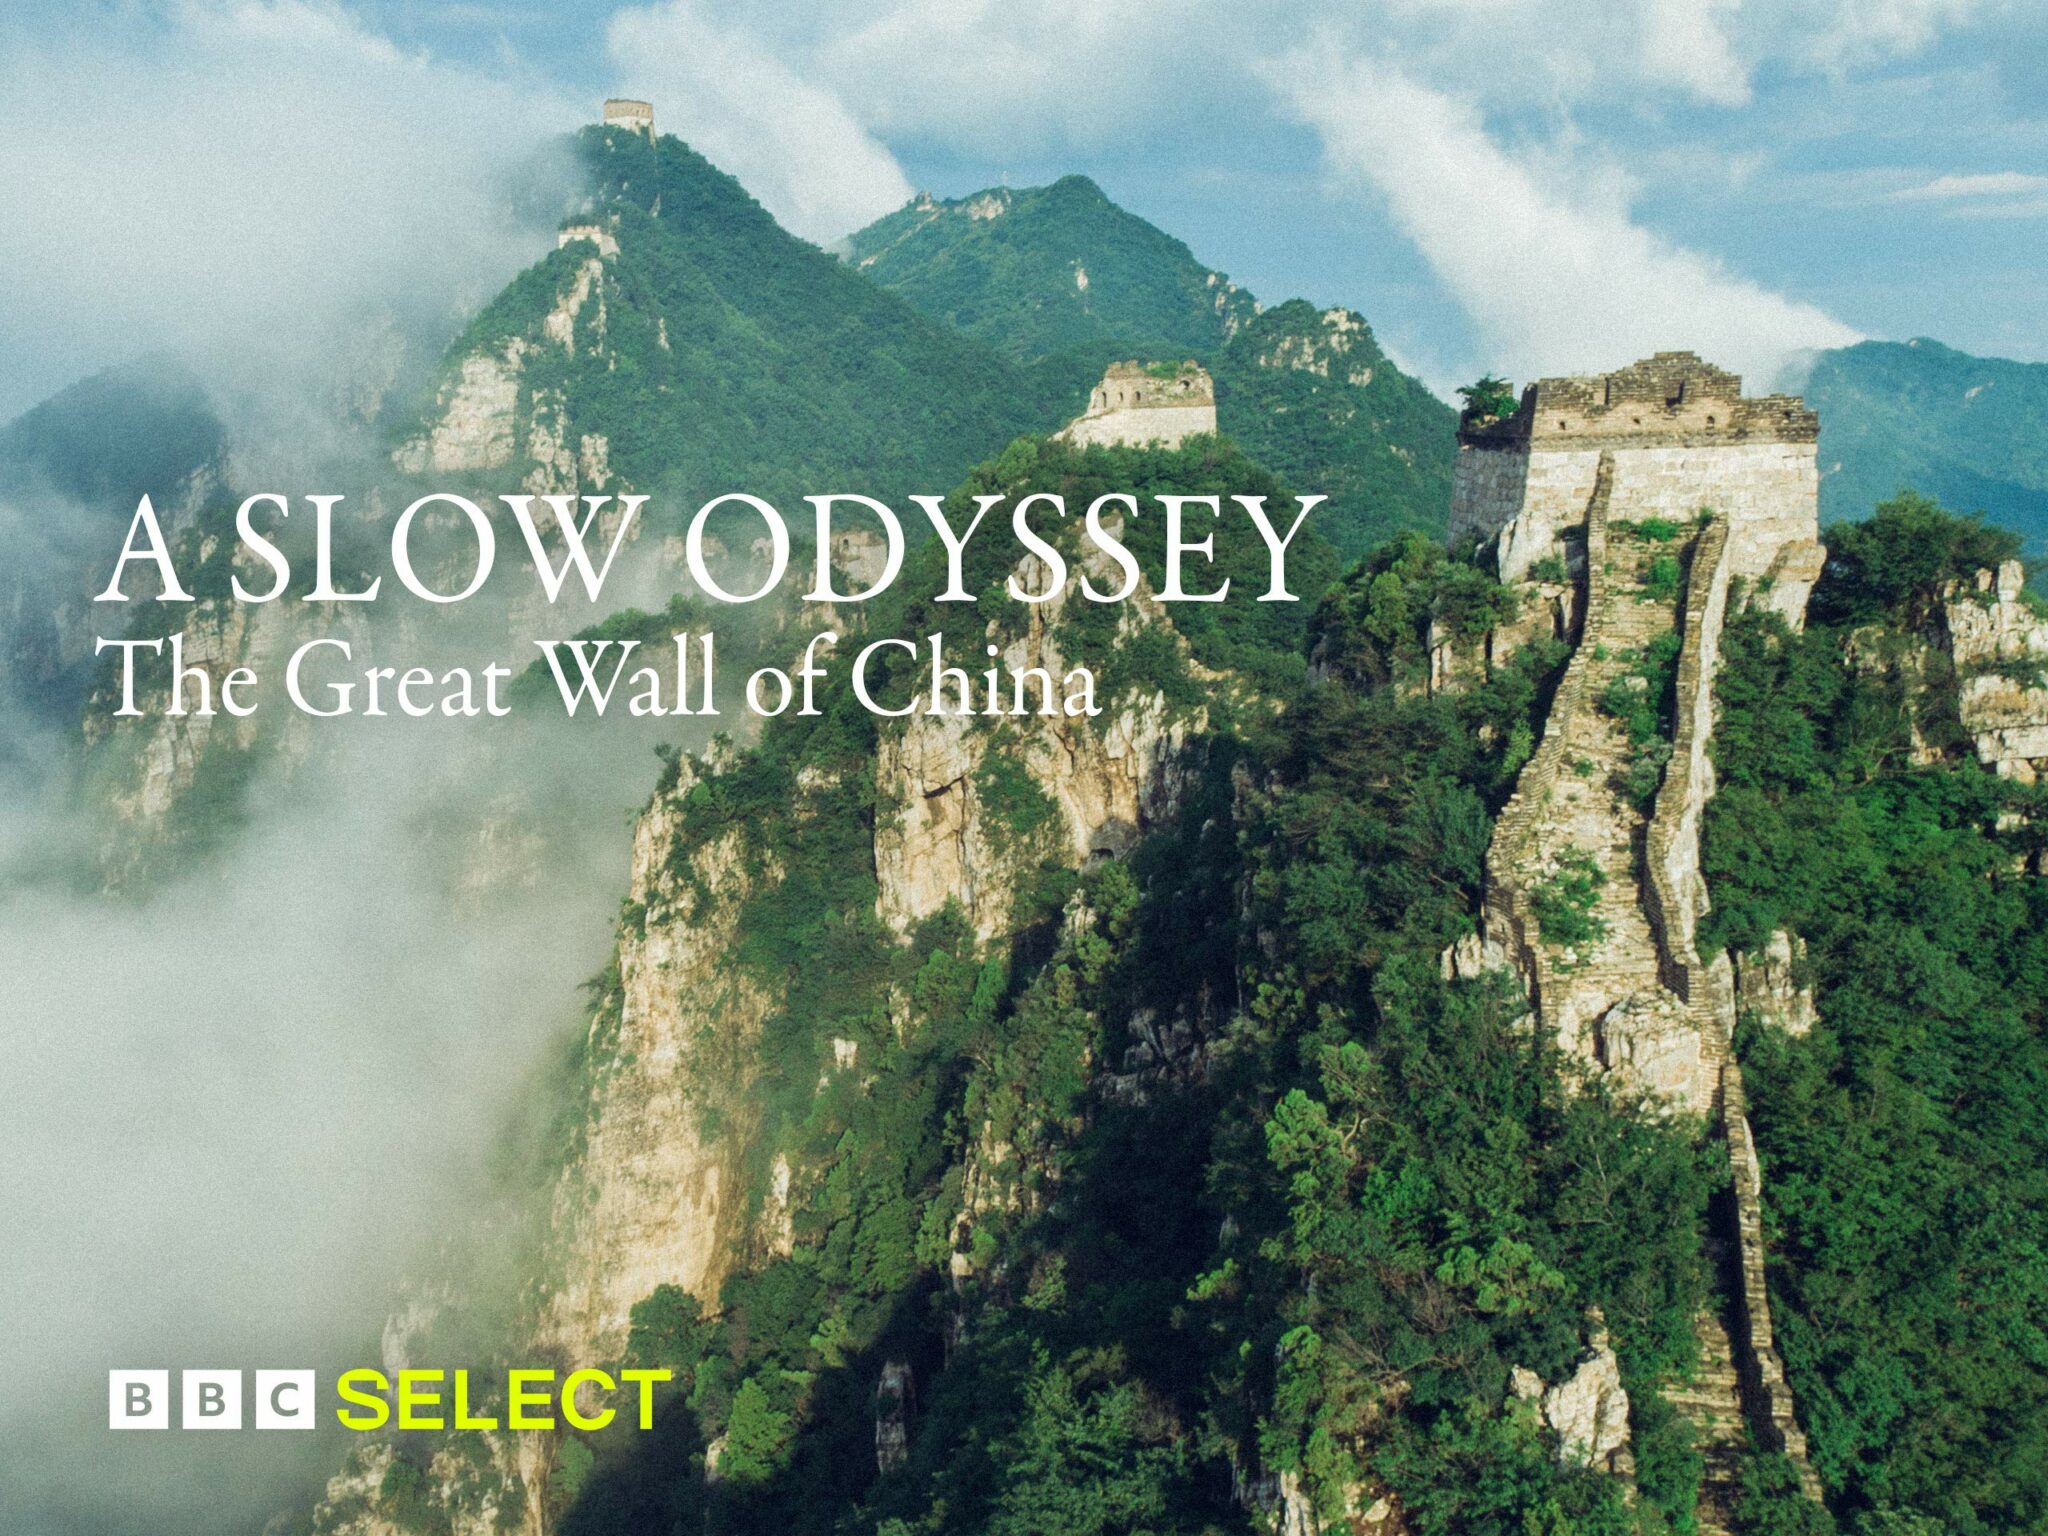 when was the great wall of china built and how long is the longest artificial structure in the world